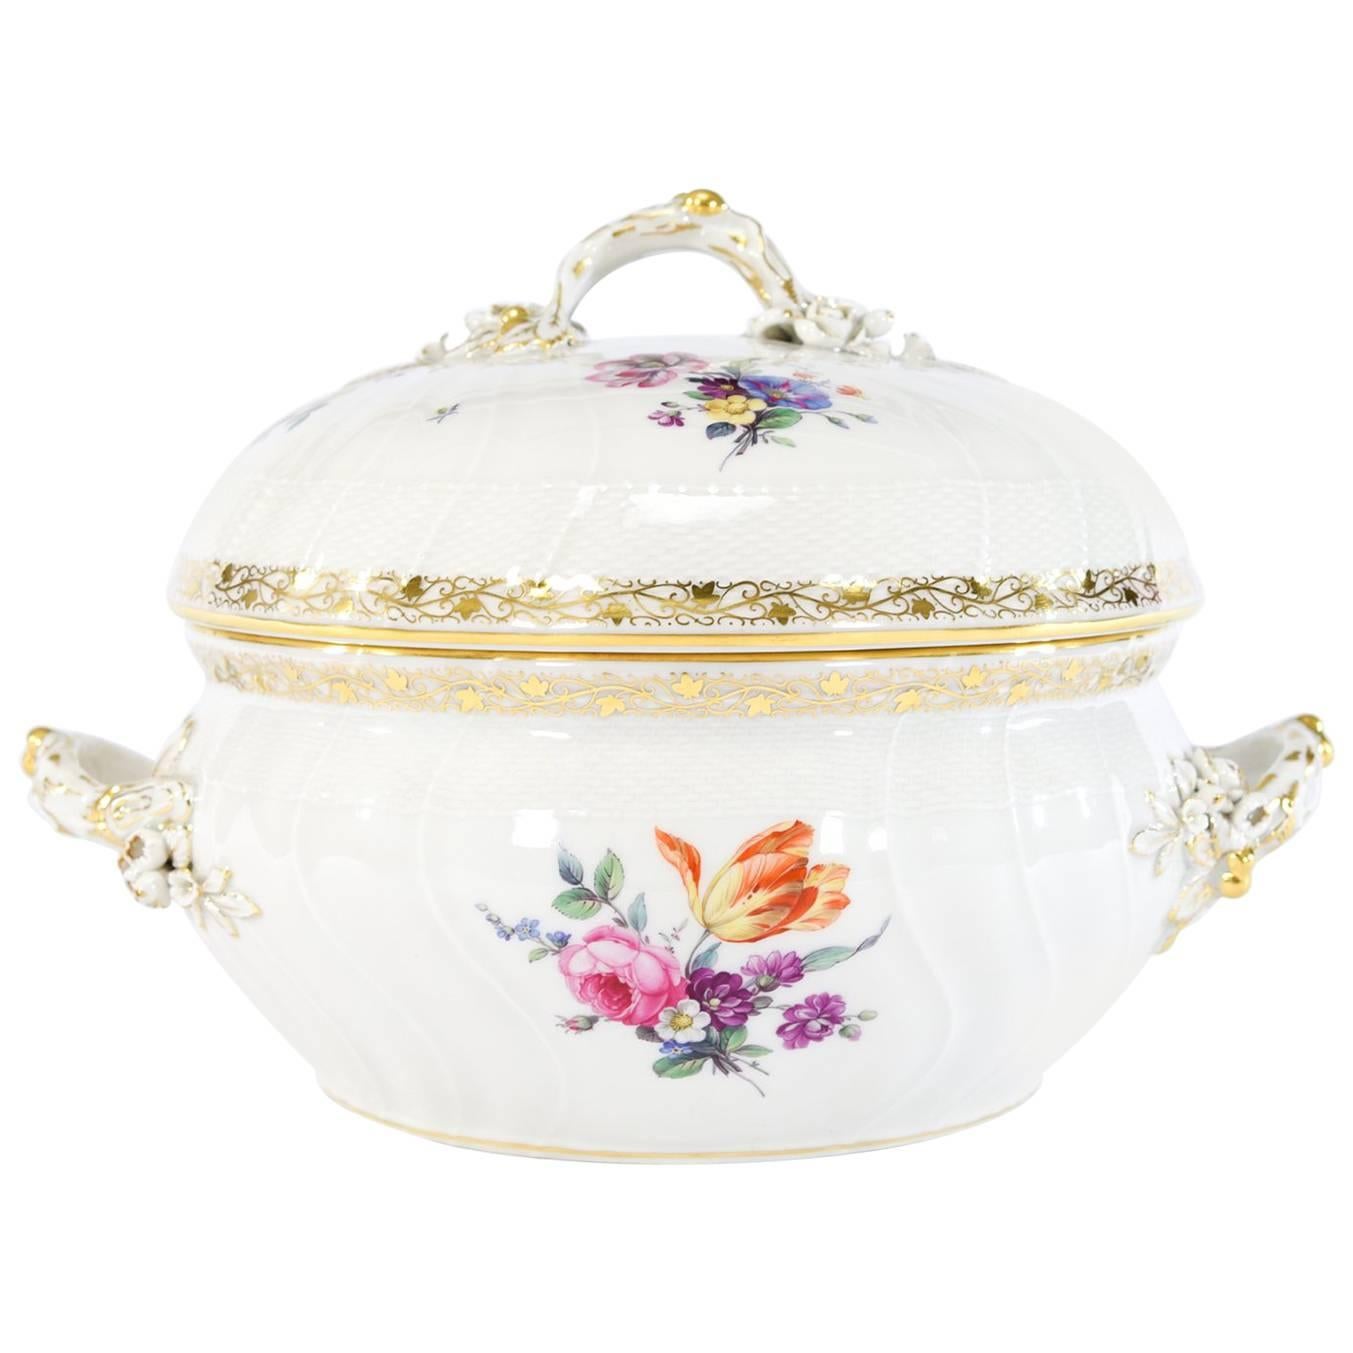 KPM White & Gold Round Tureen with Hand Painted Floral Decoration Molded Relief